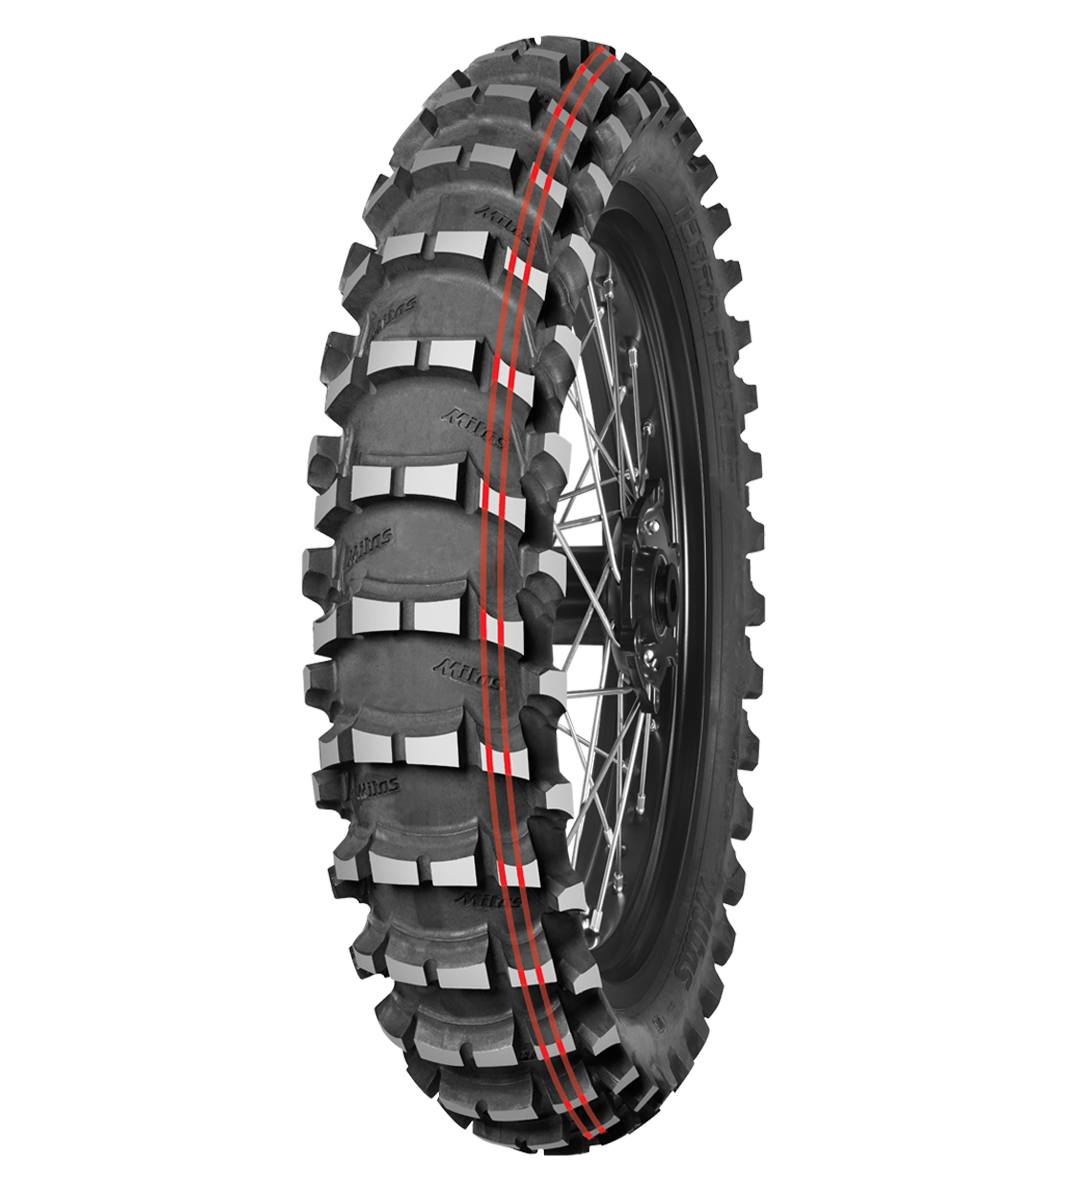 Mitas TERRA FORCE-MX Sand 110/90-19 Motocross Competition Off-Road Sand 62M 2 Red Tube Rear Tire, 226647, 110/90-19, Motocross, Motocross Competition, Off-Road, Rear, Terra Force, Terra Force-MX Sand, Trail, Tires - Imported and distributed in North &amp; South America by Lindeco Genuine Powersports - Premier Powersports Equipment and Accessories for Motorcycle Enthusiasts, Professional Riders and Dealers.